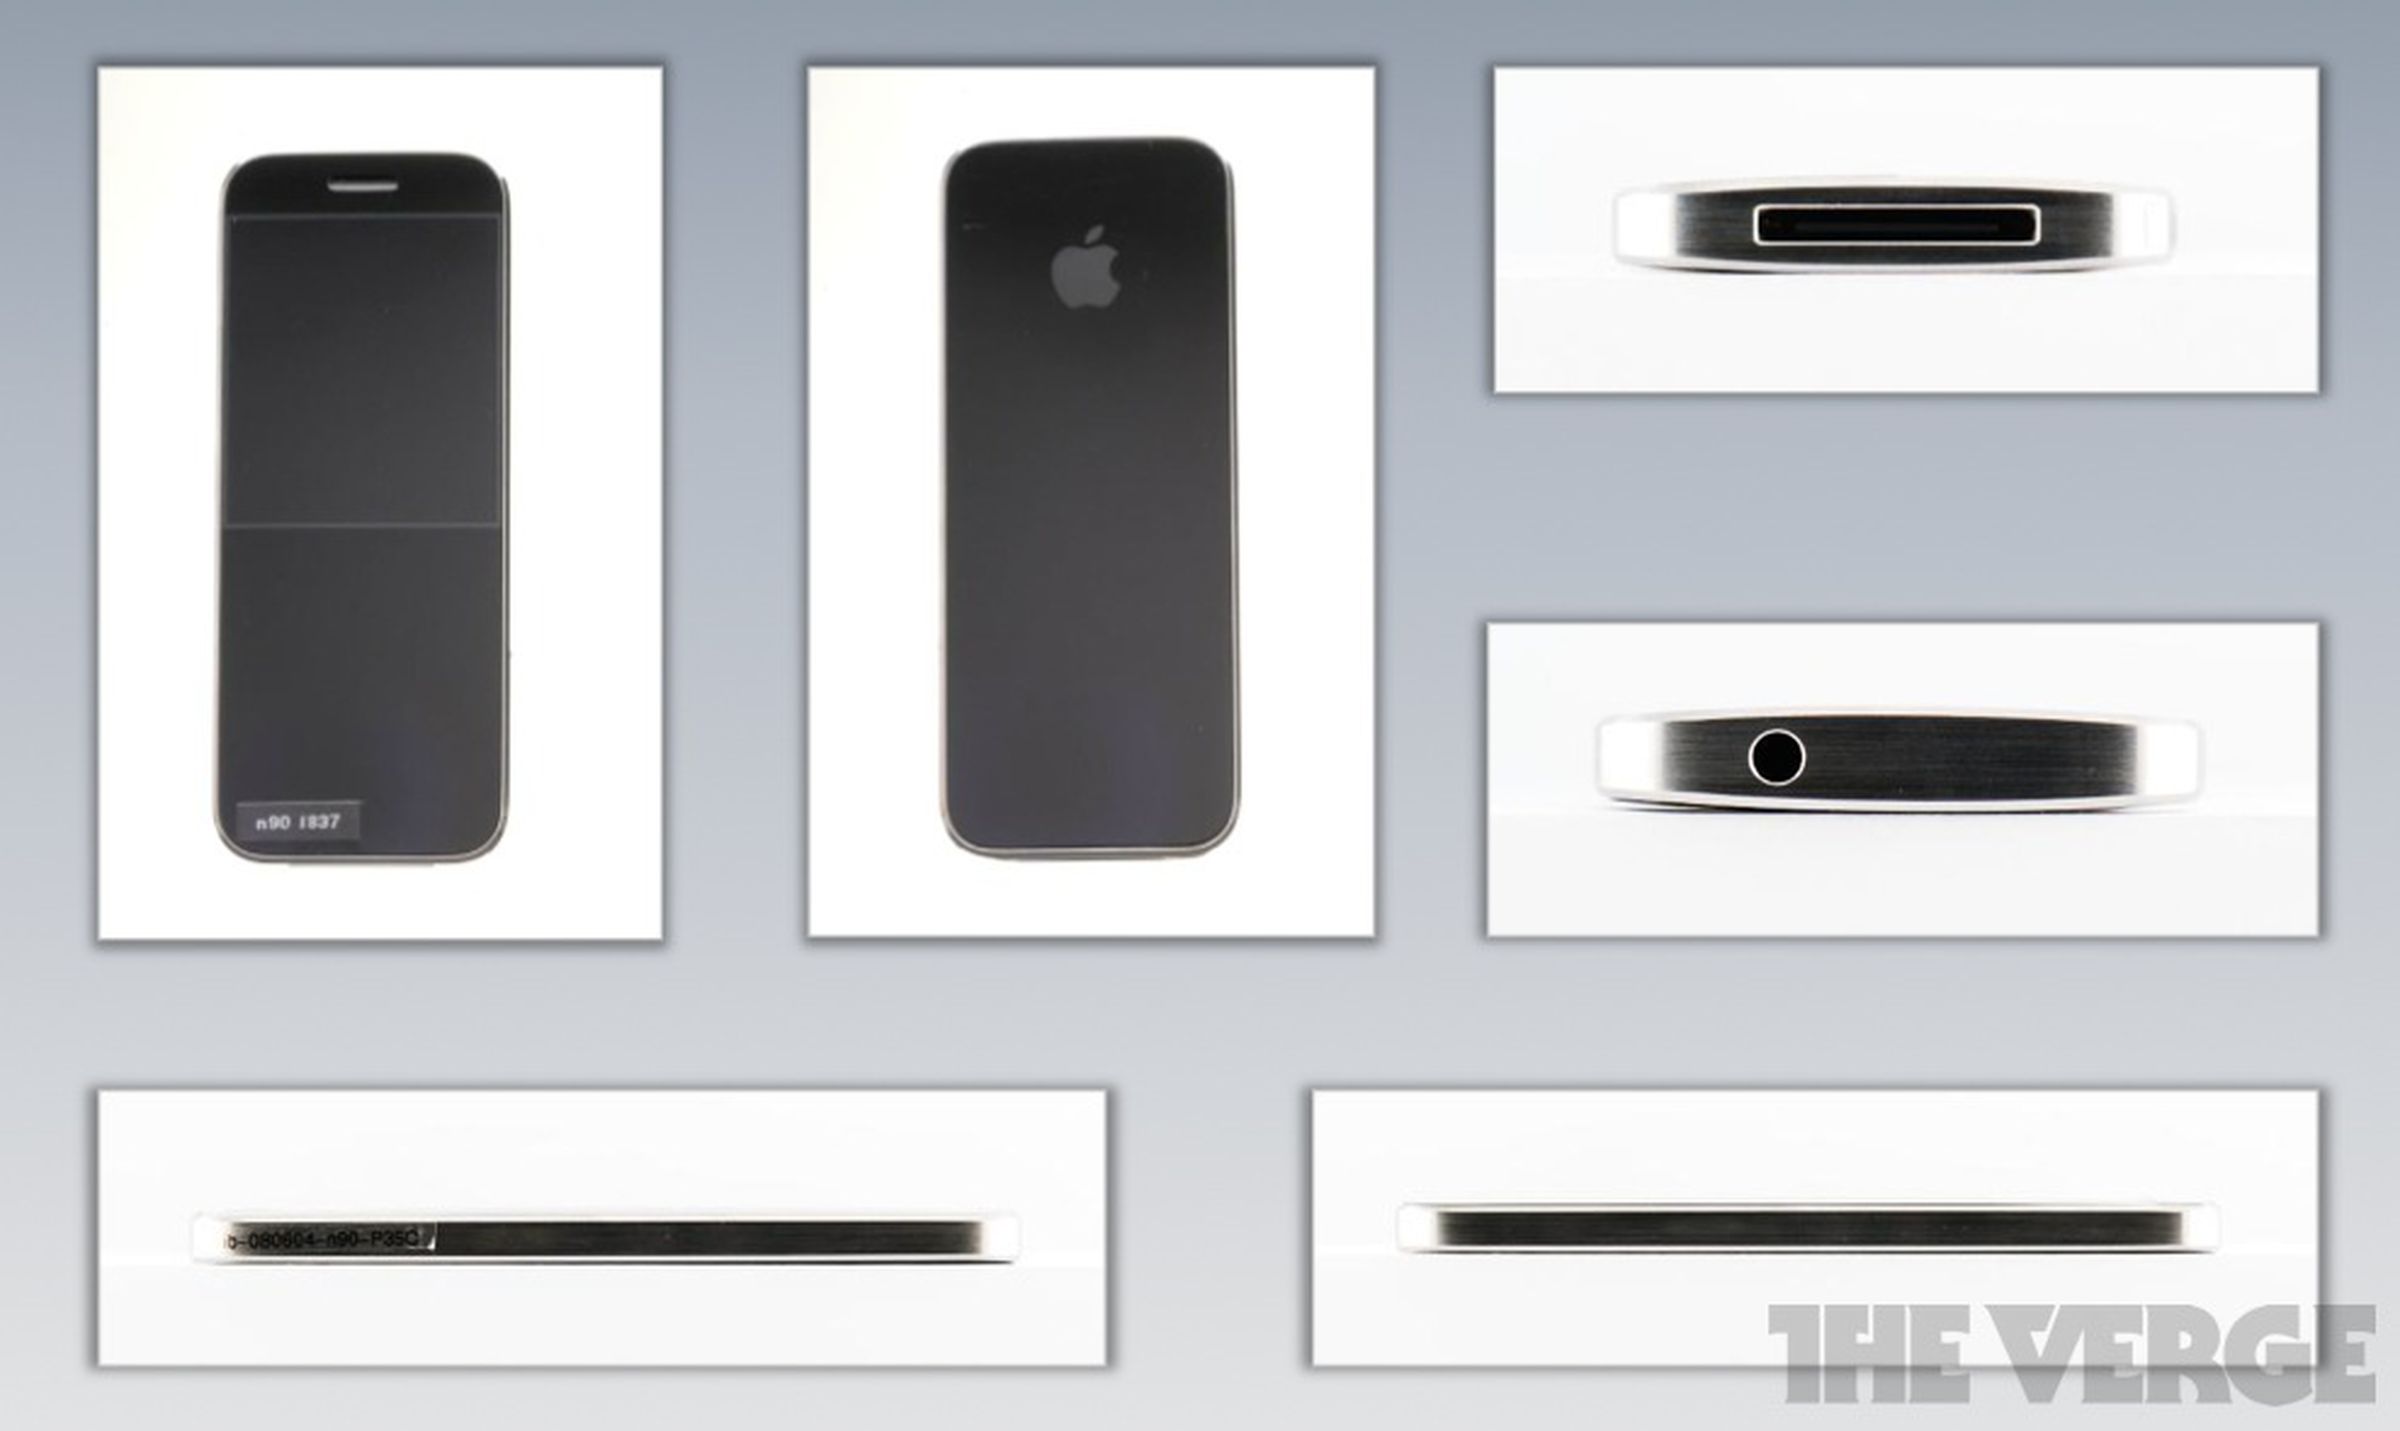 Apple iPhone prototype pictures and CAD files